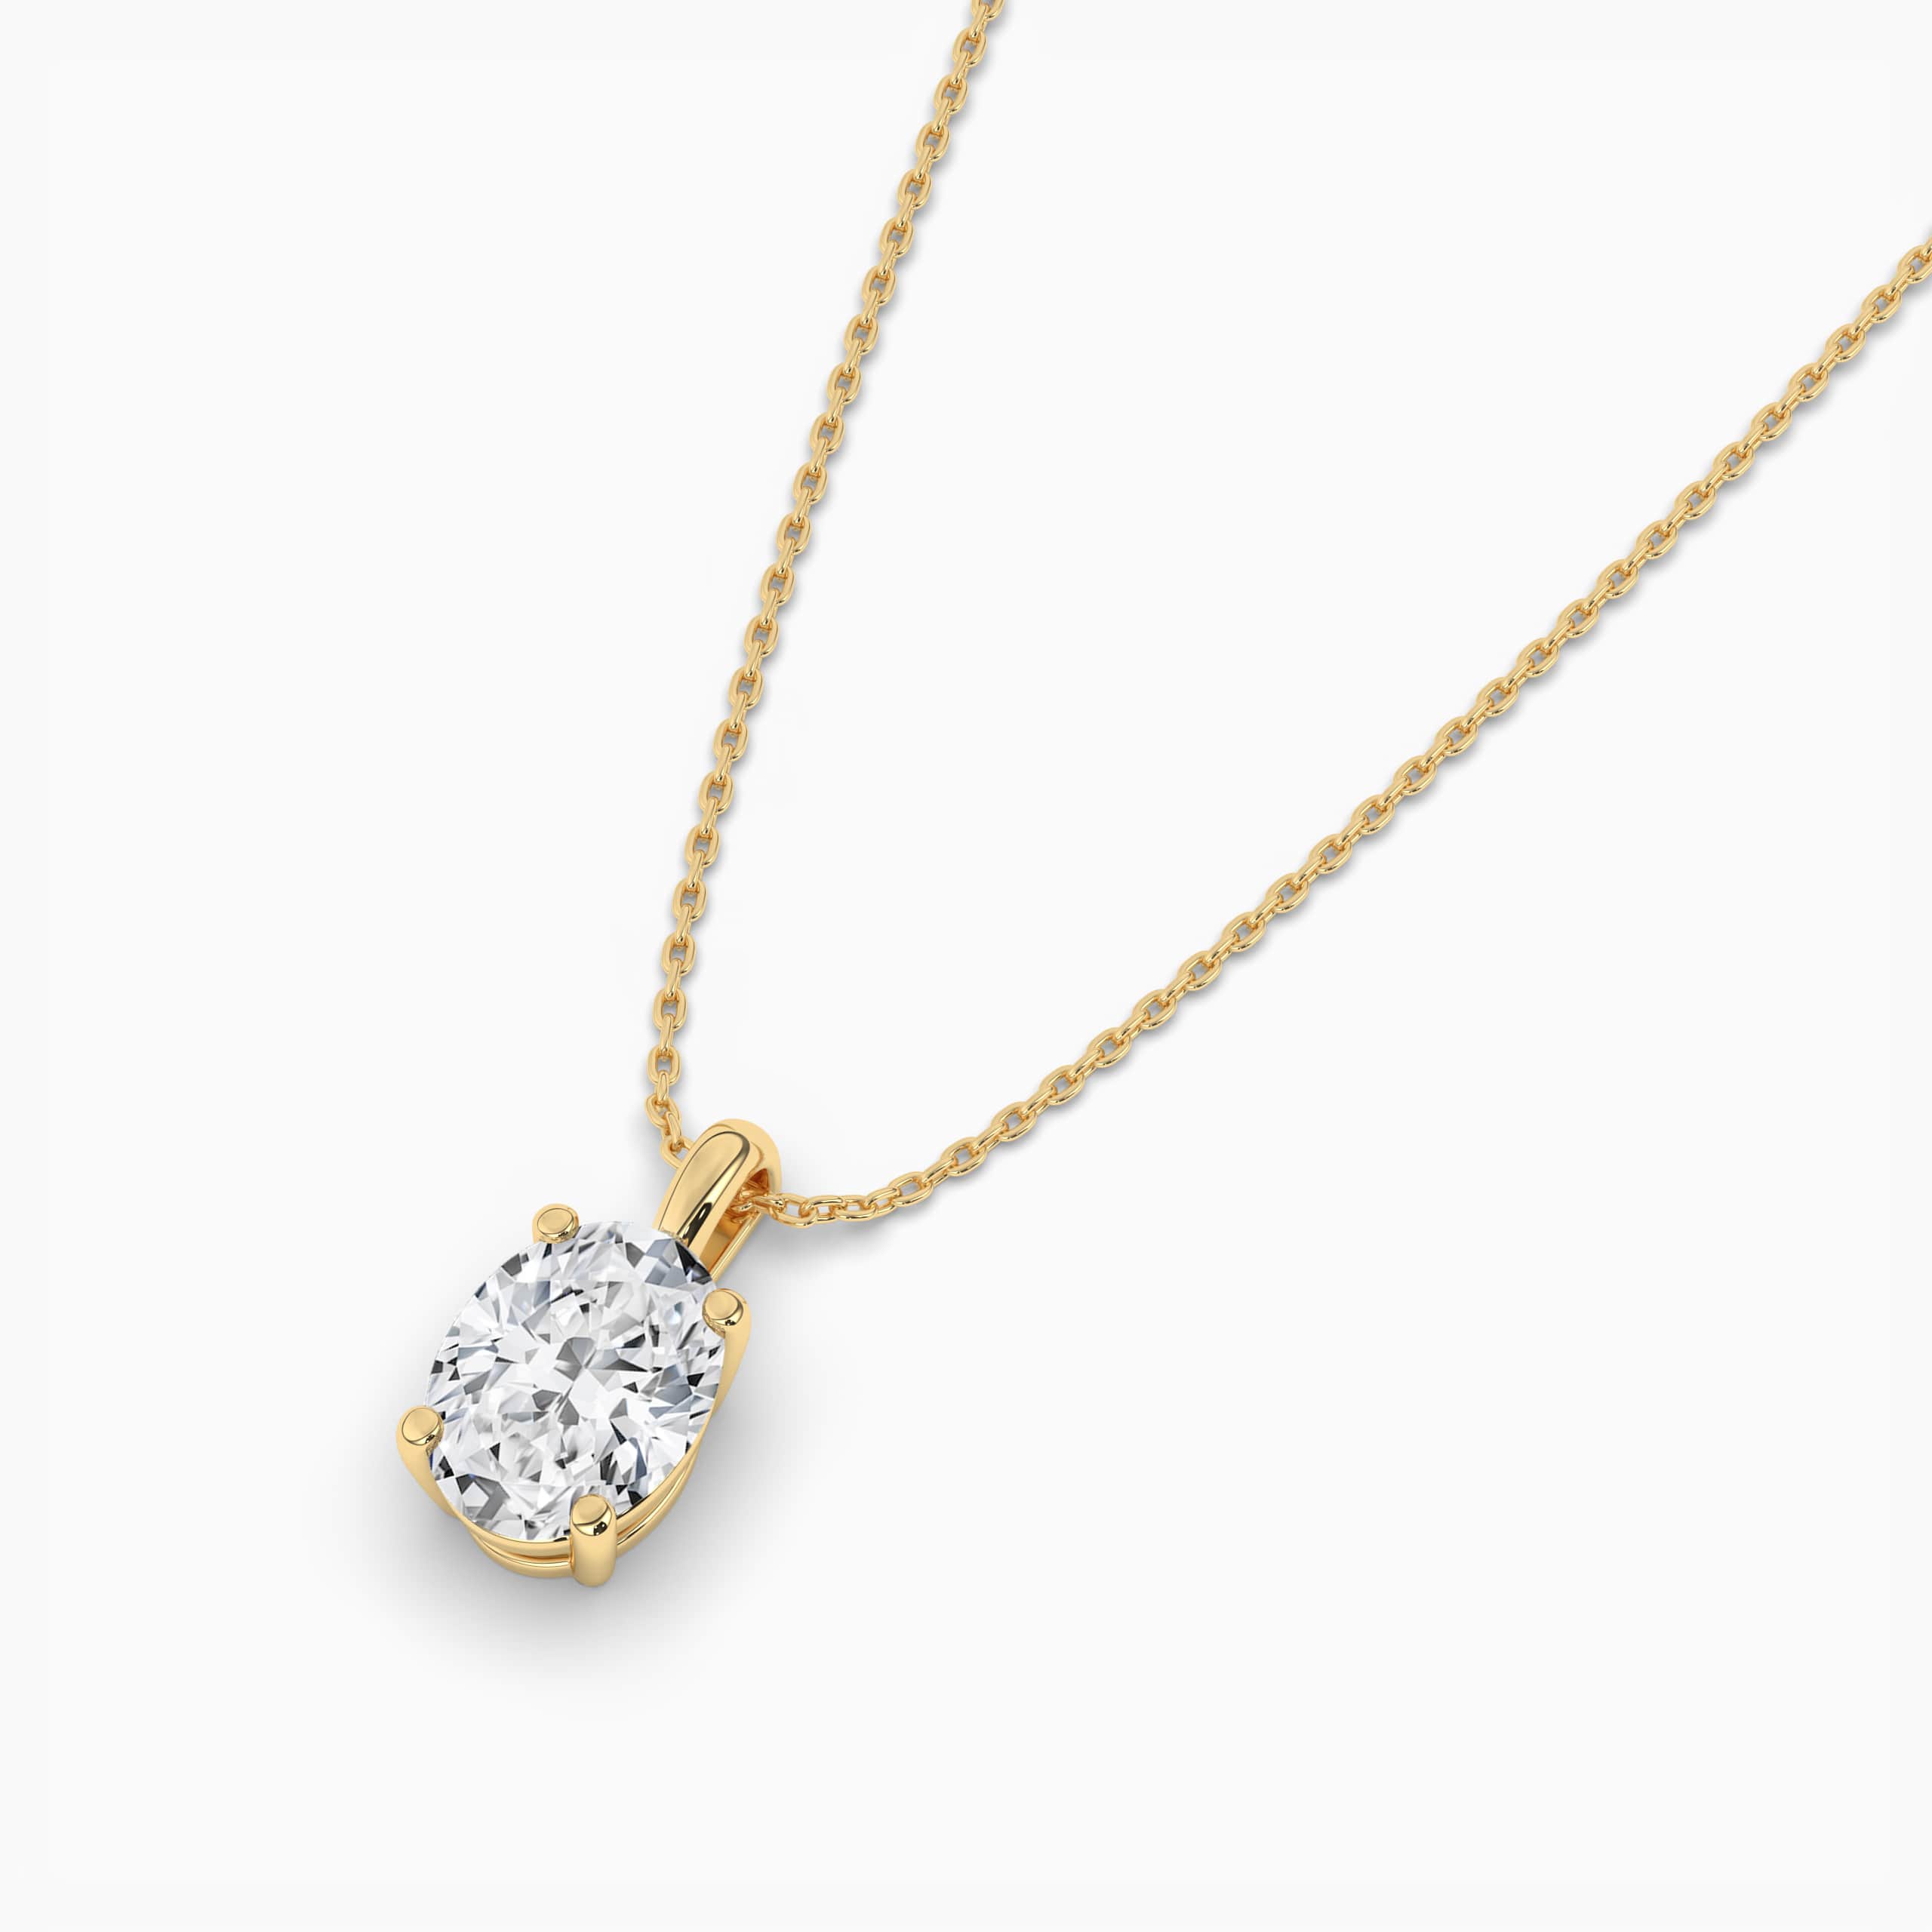 Oval Diamond Solitaire Pendant Yellow Gold Necklace 